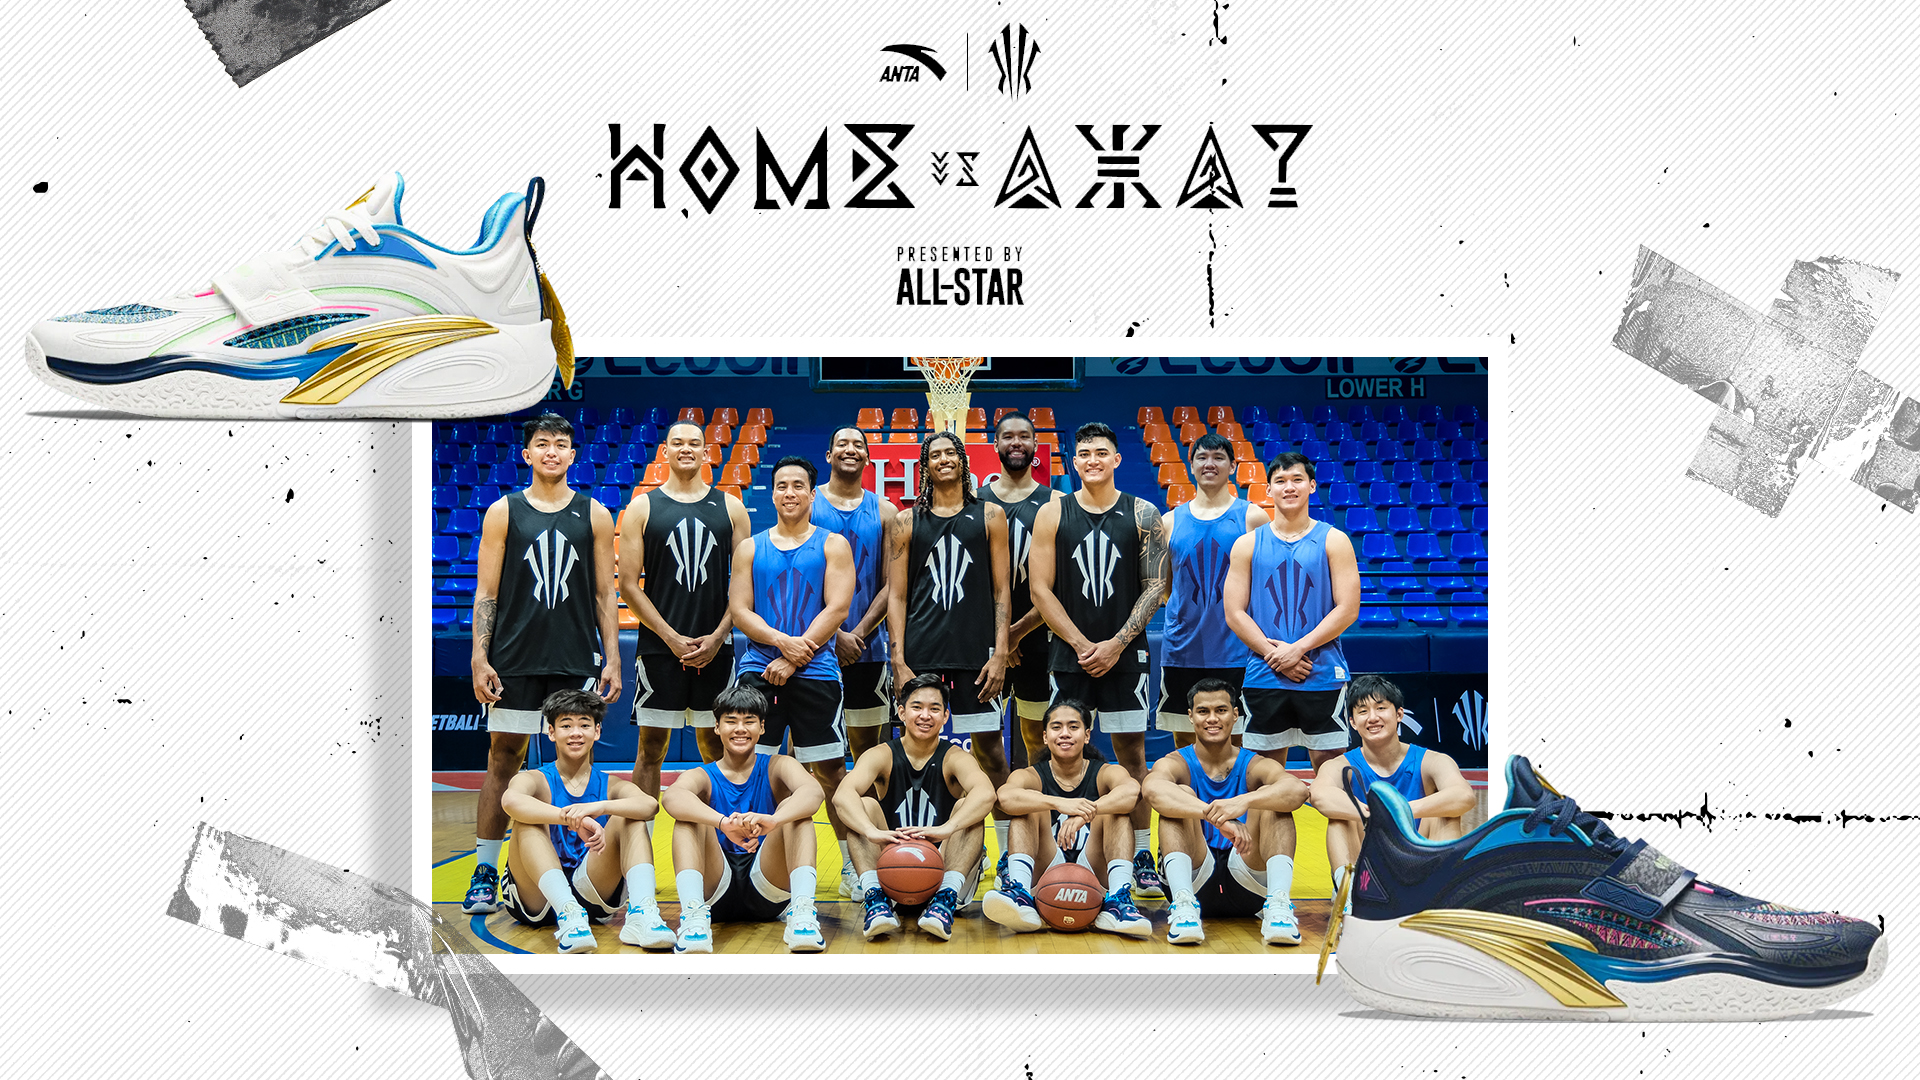 Anta KAI 1 Home vs Away Game is Basketball at Its Purest